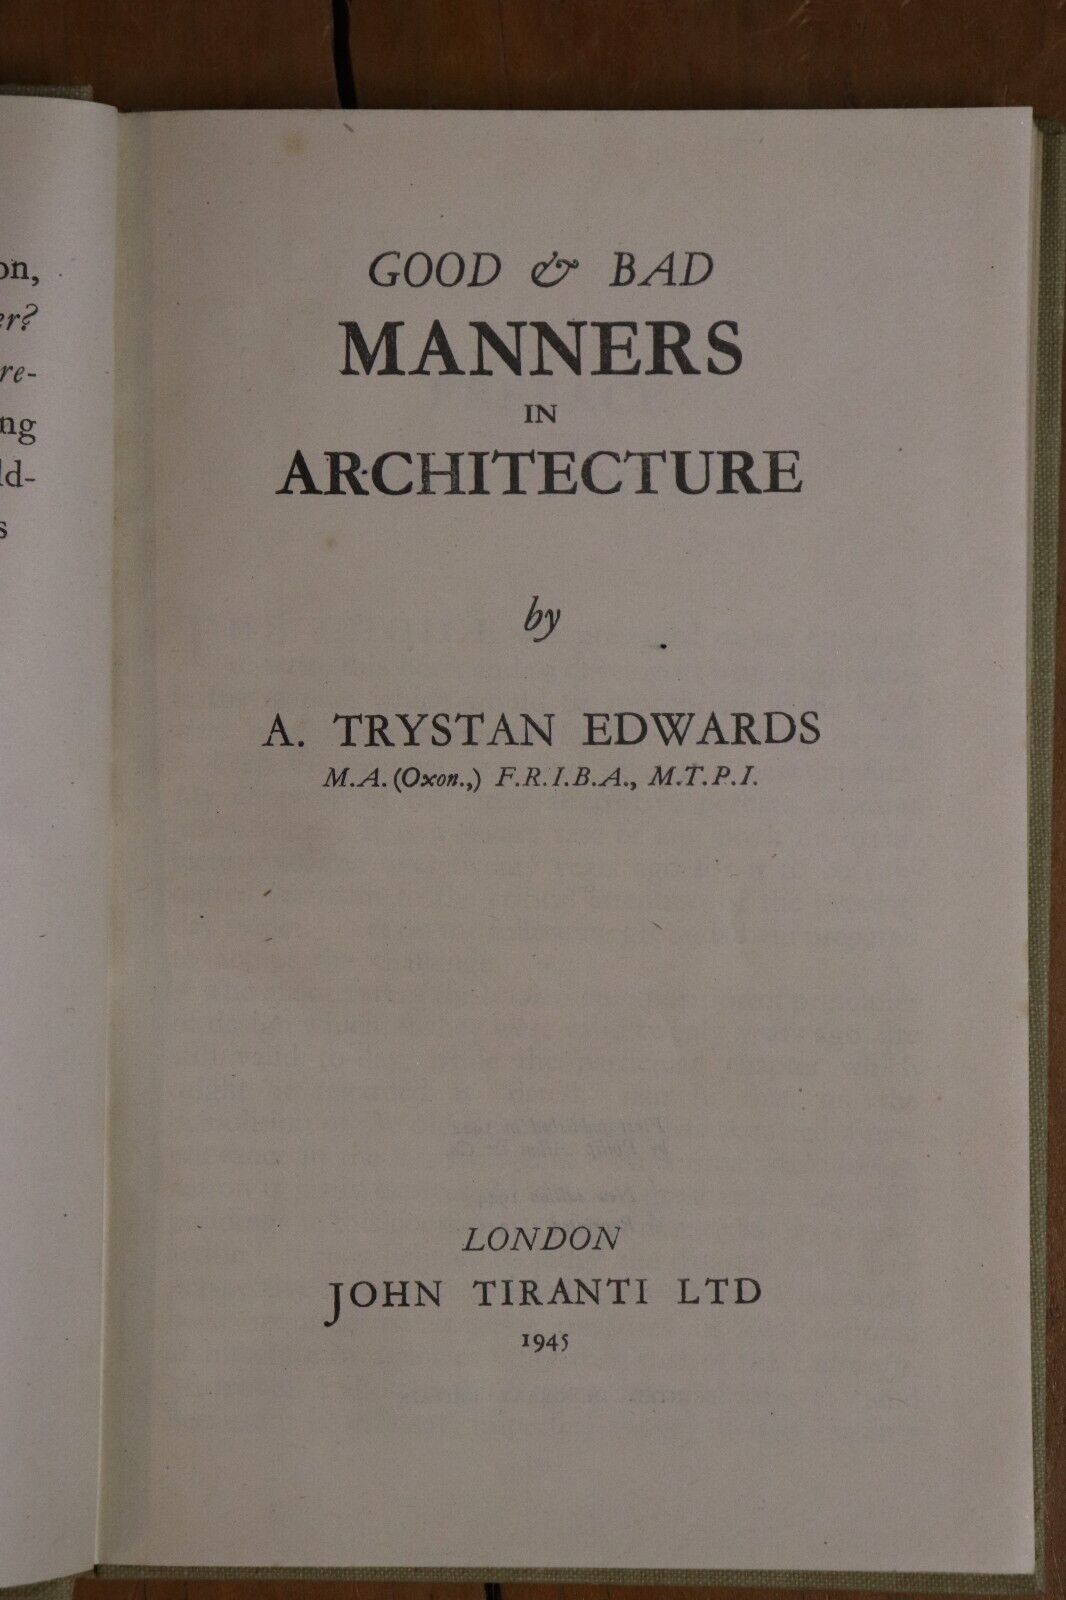 Good & Bad Manners In Architecture - 1945 - Hardcover Architectural Book - 0